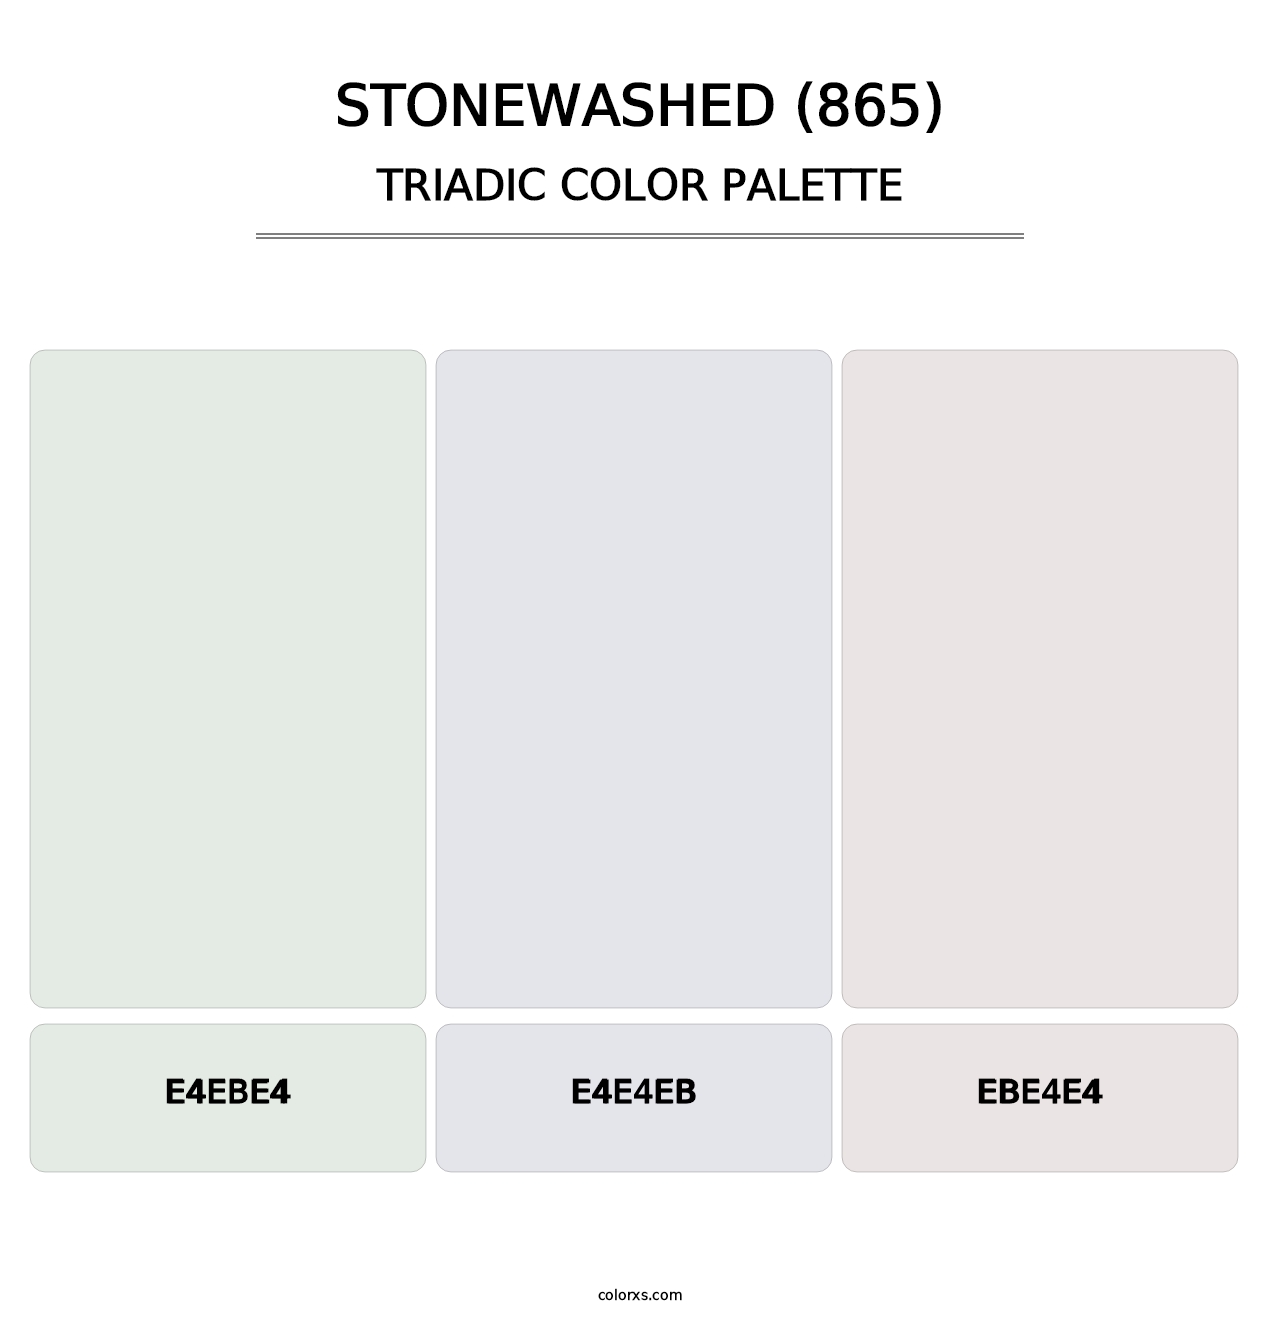 Stonewashed (865) - Triadic Color Palette